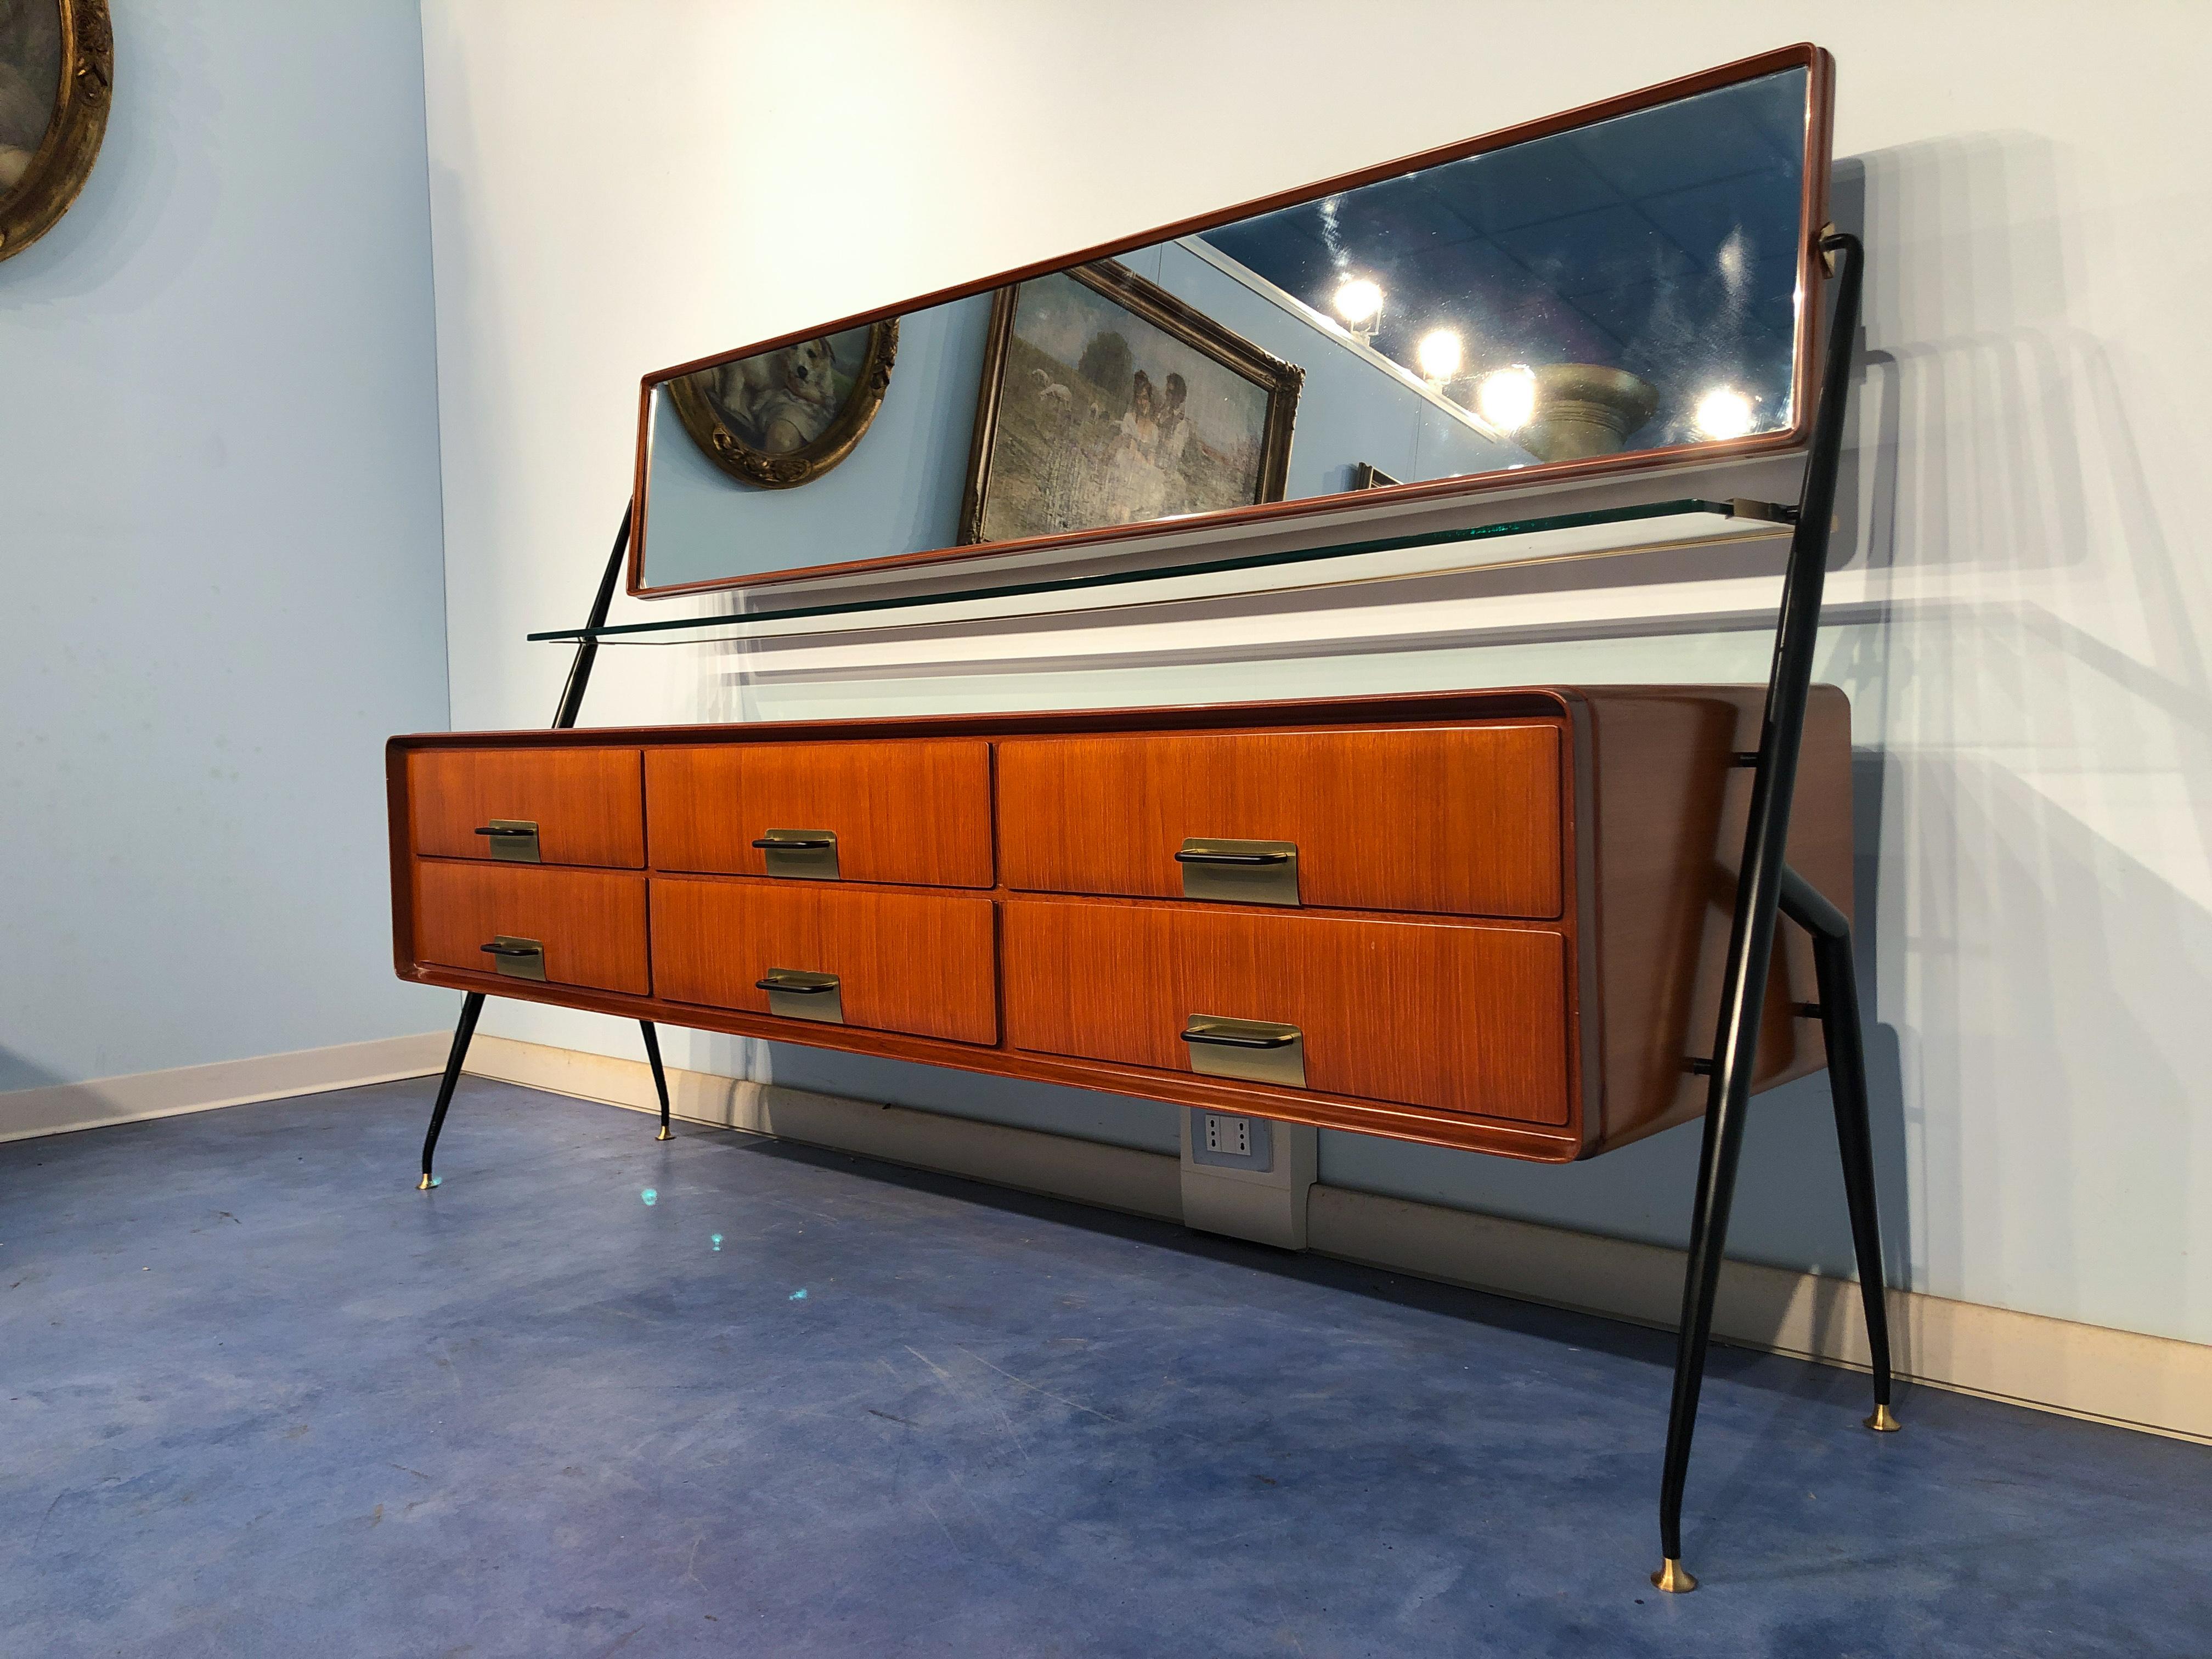 Stylish Italian sideboard-vanity dresser designed by Silvio Cavatorta in 1955. The cabinet is in teak wood, equipped with six drawers and finished with brass details, surmounted by a fixed glass shelf trimmed in brass and a swivel mirror. All rising